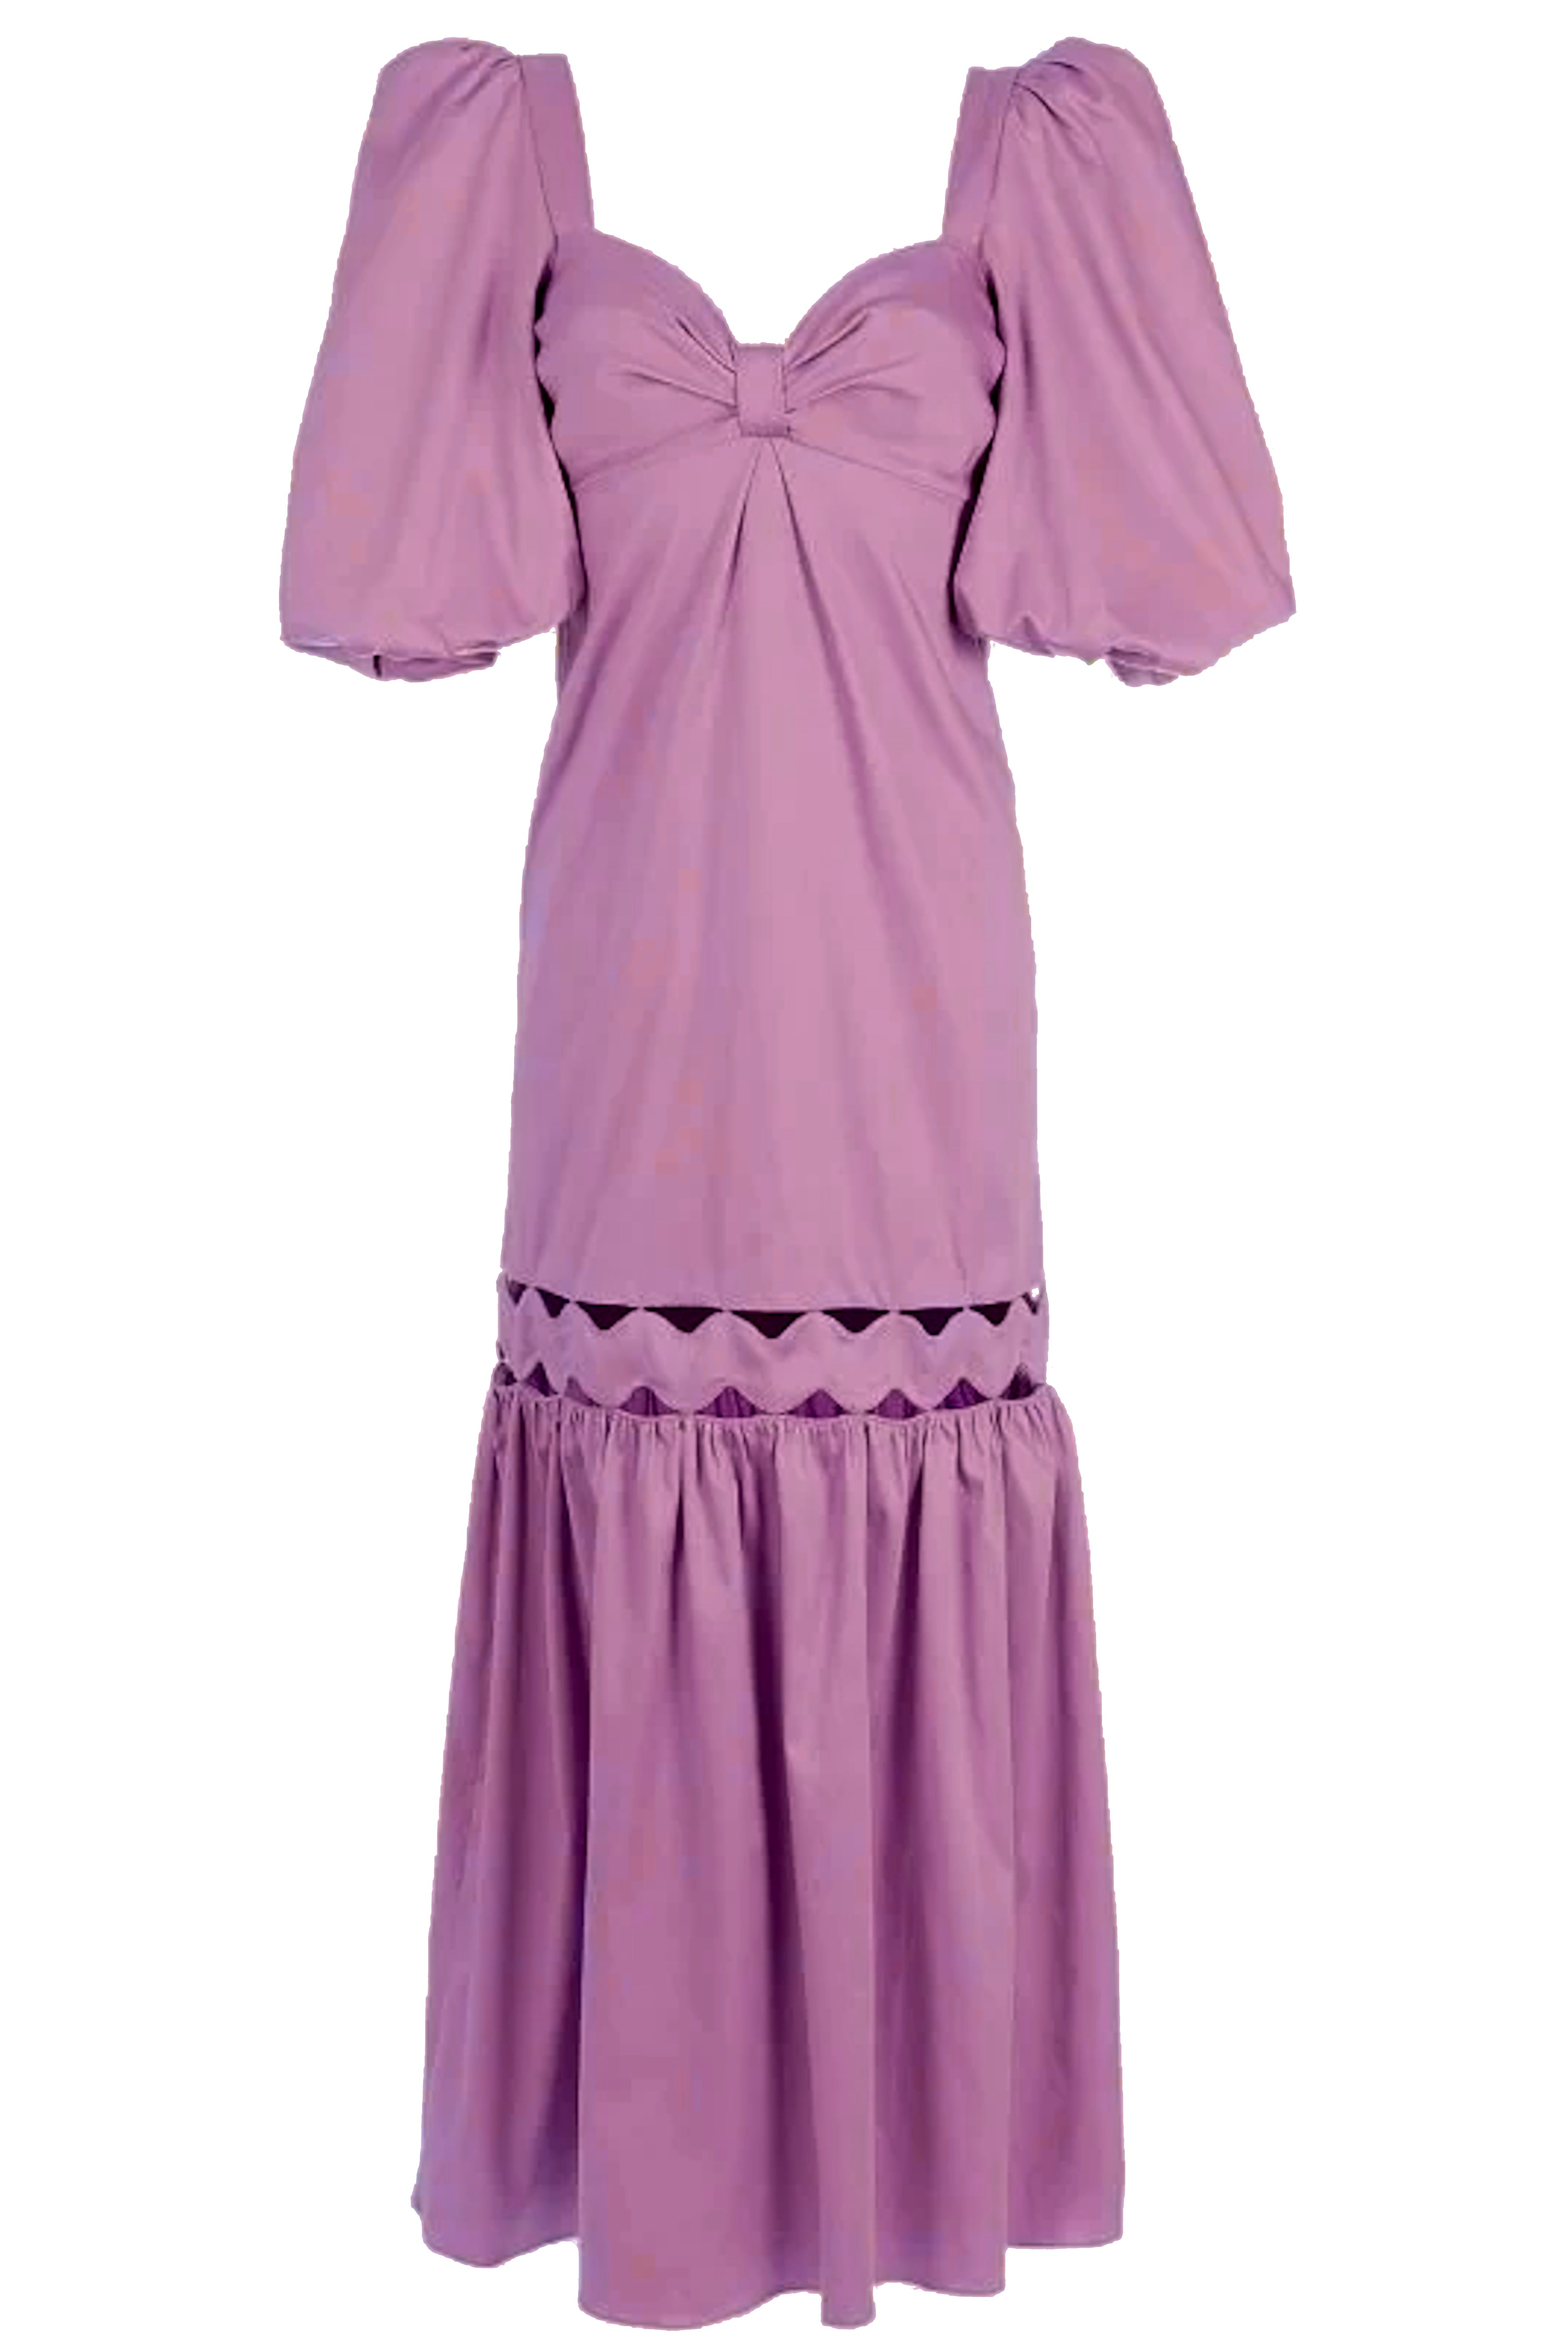 Moves Lilac Puff-Sleeved Long Dress Product